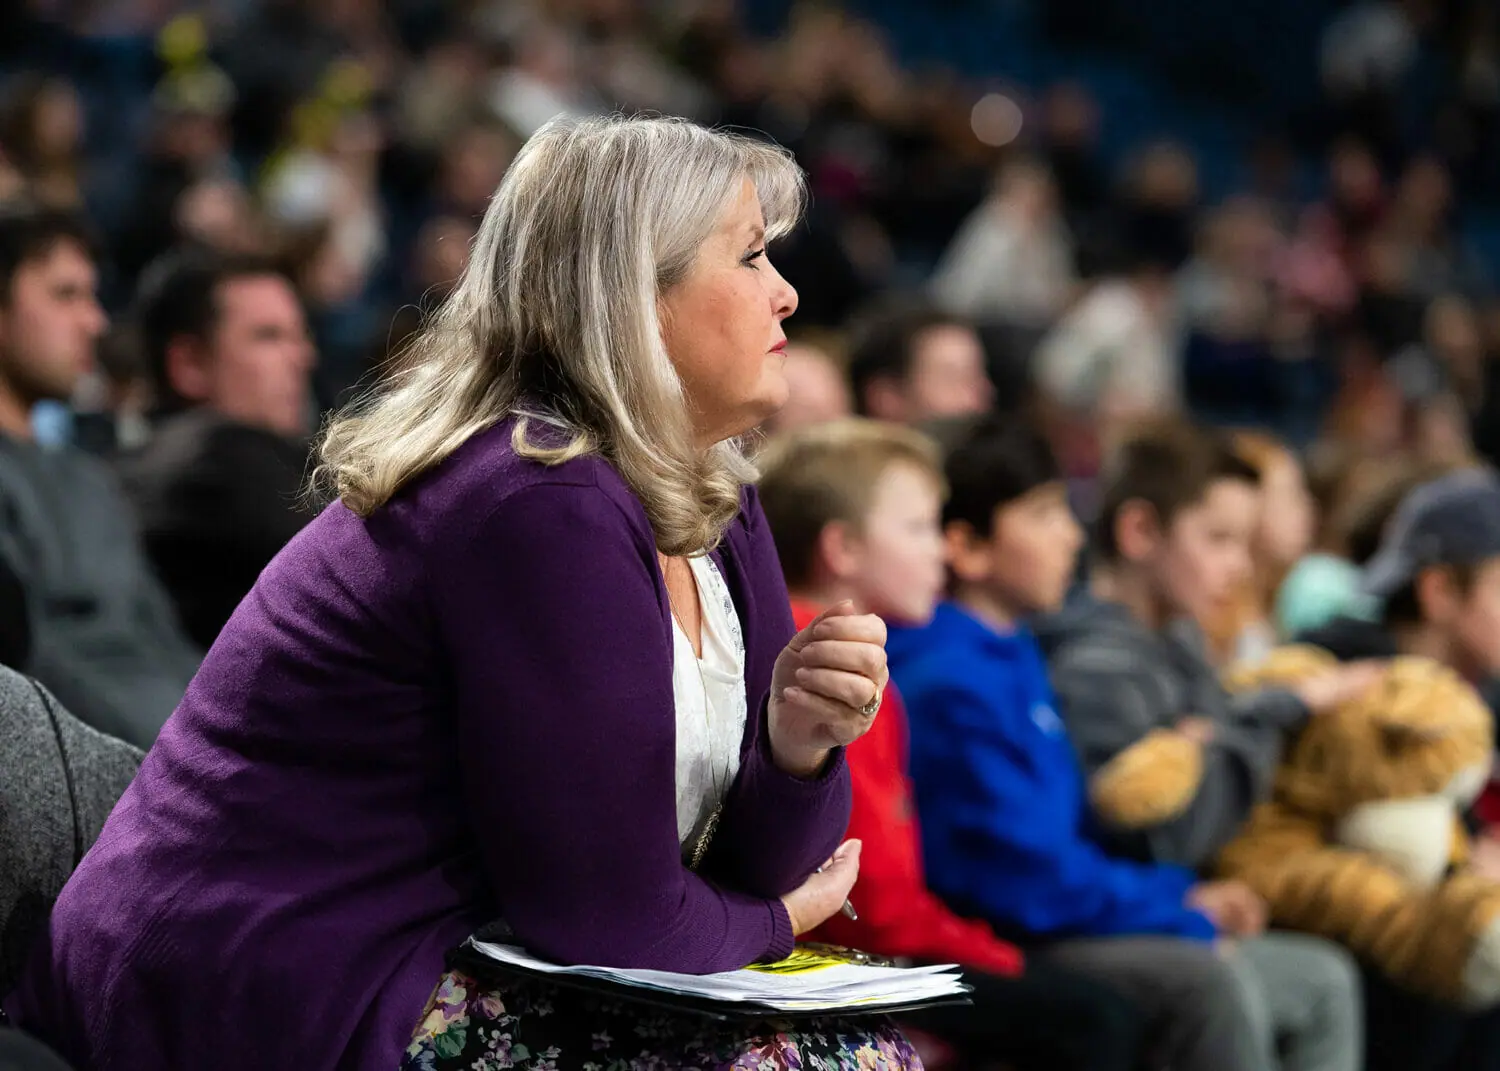 In this image: Andrea Plato watching a basketball game.